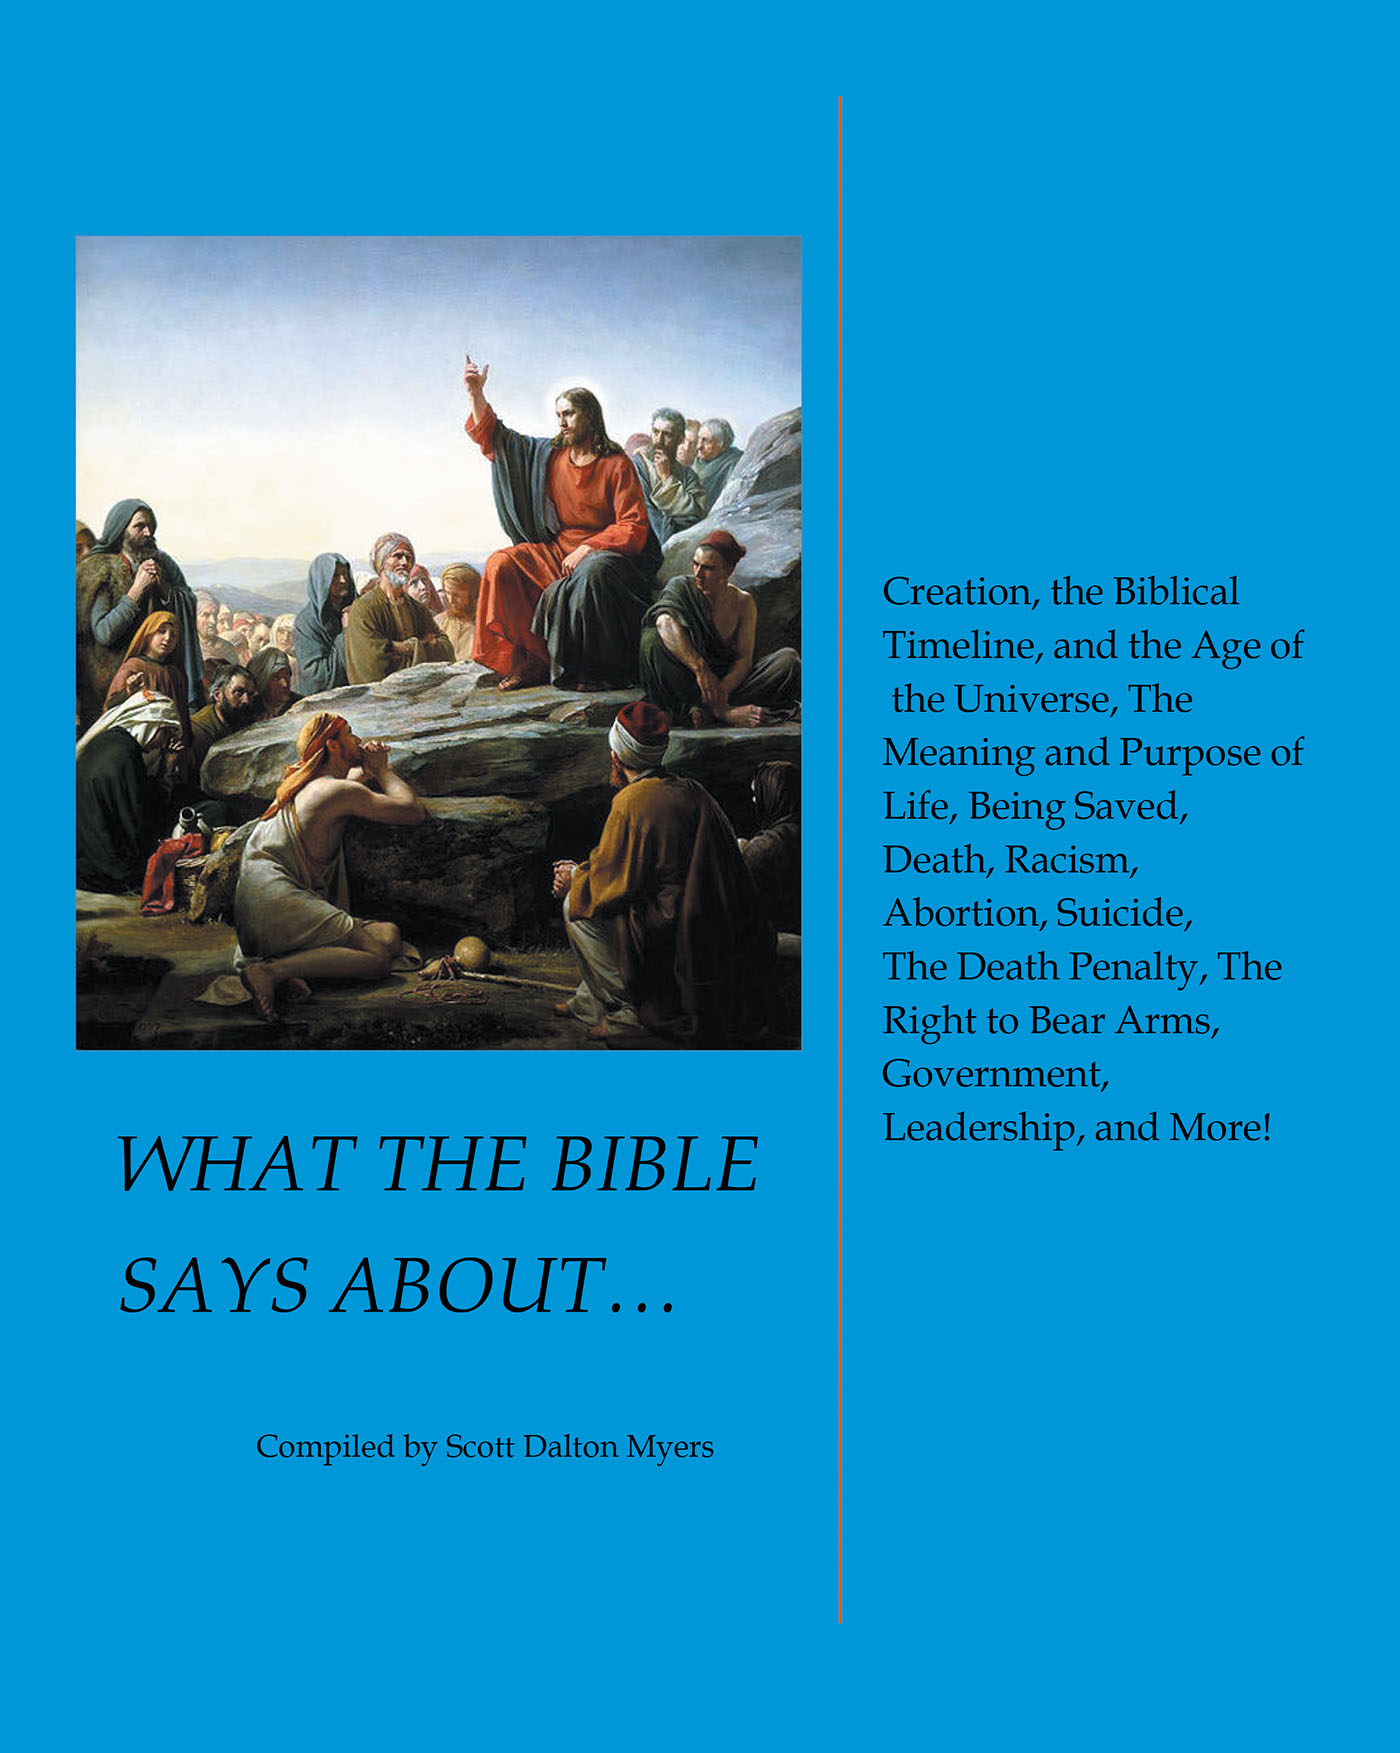 Scott Dalton Myers’s Newly Released “What the Bible Says About…” is an Intriguing and Inviting Examination of Key Biblical Themes